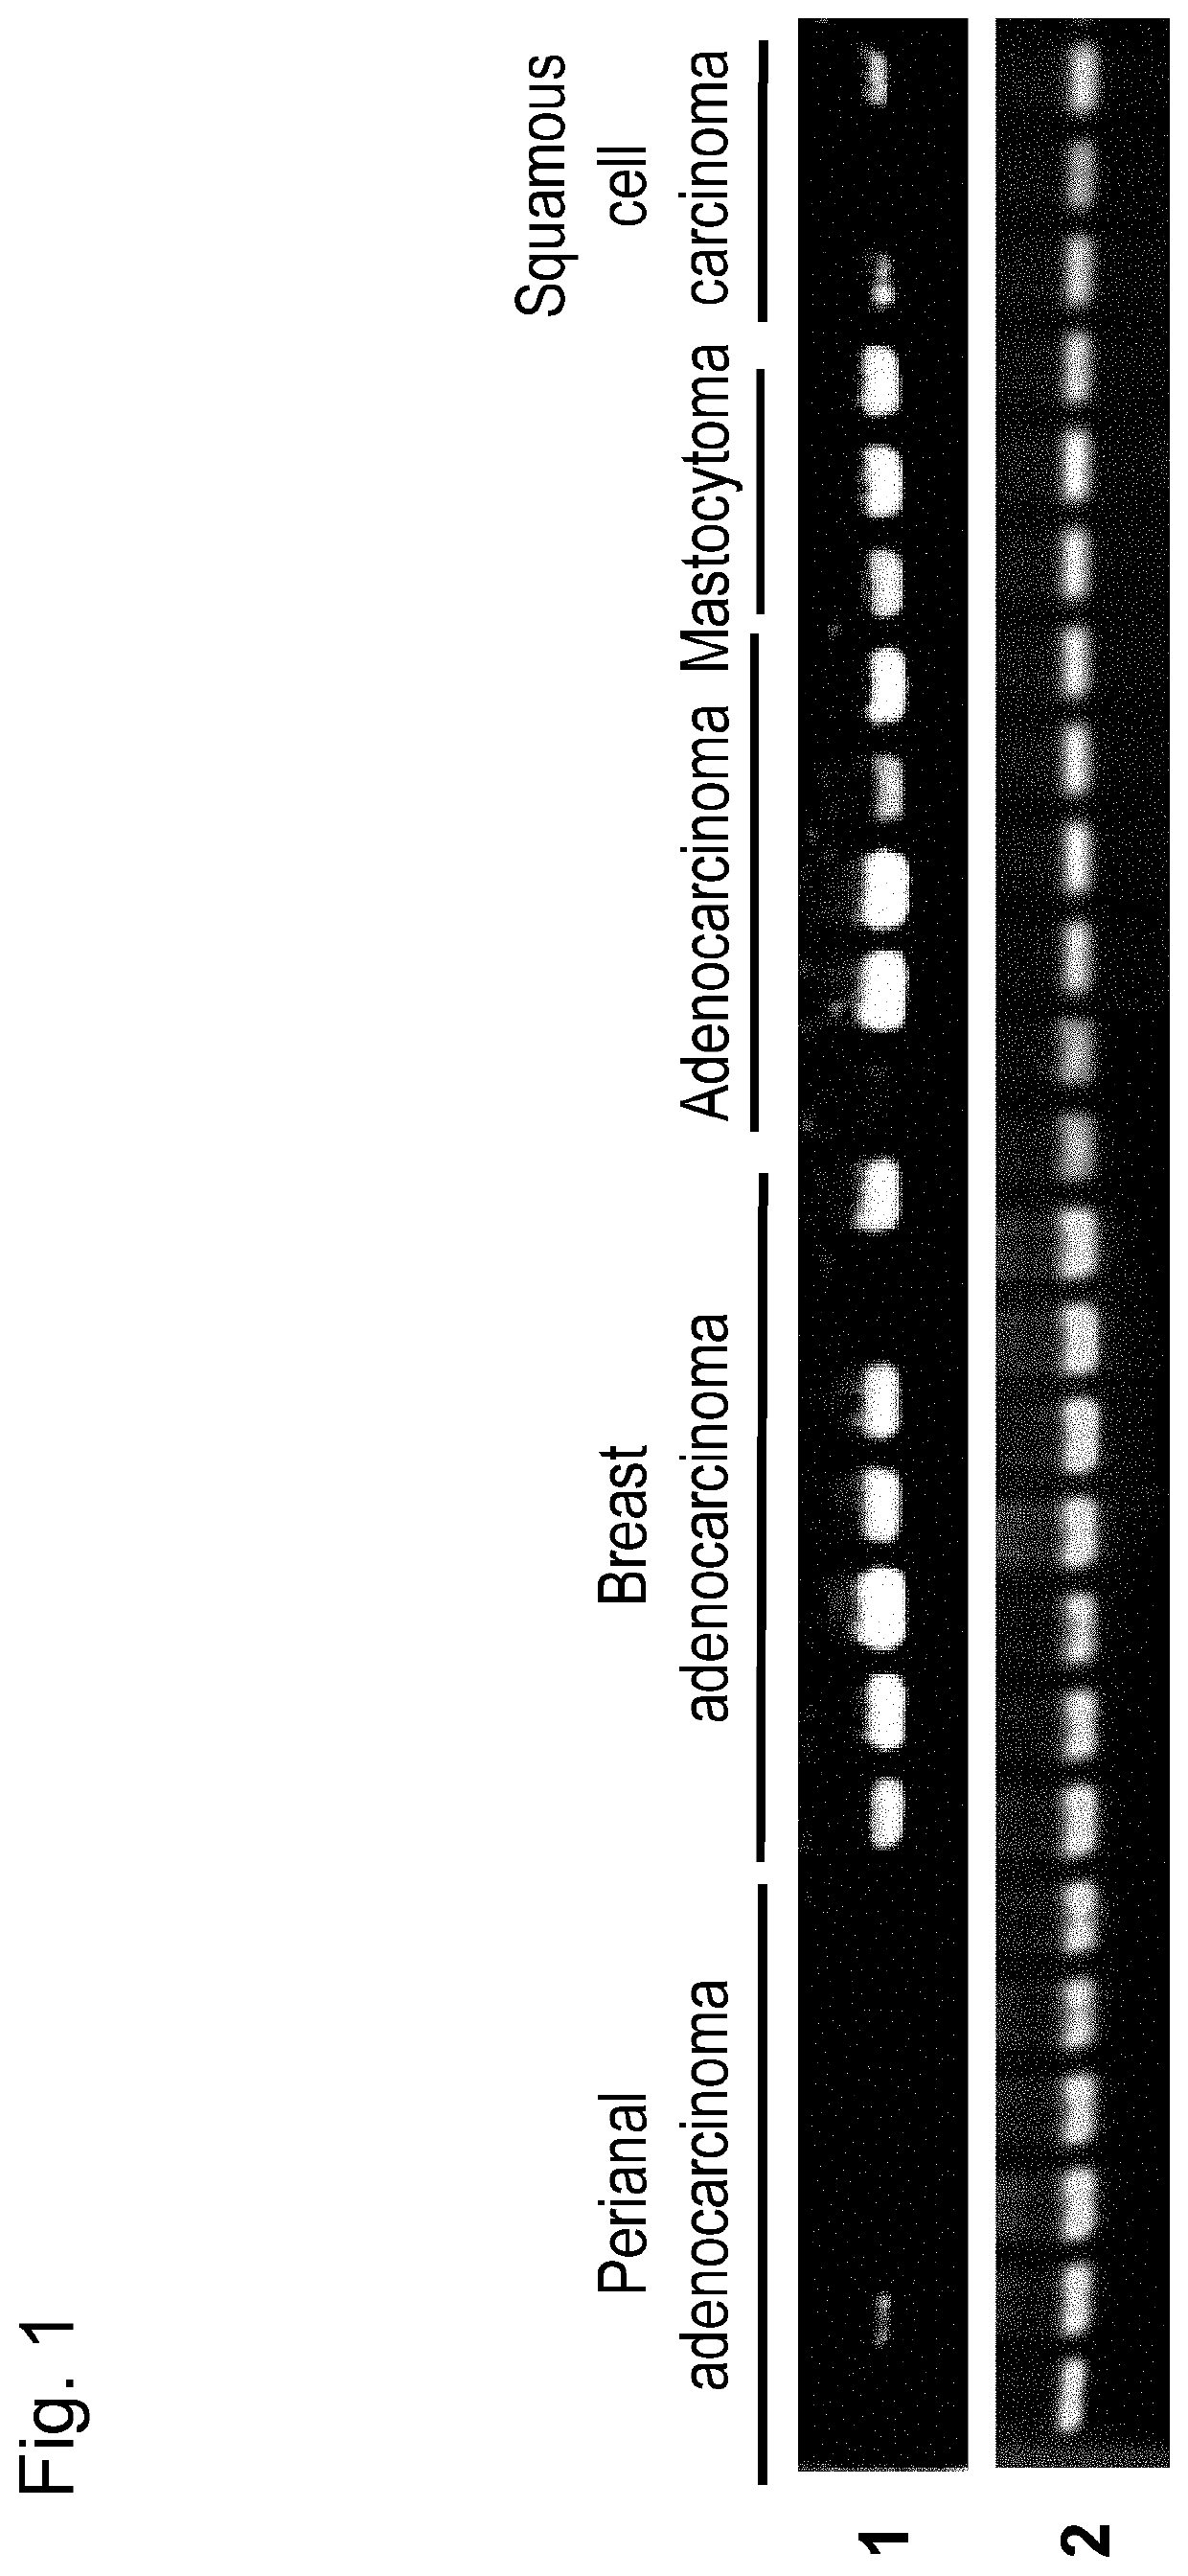 Pharmaceutical composition for treating and/or preventing cancer